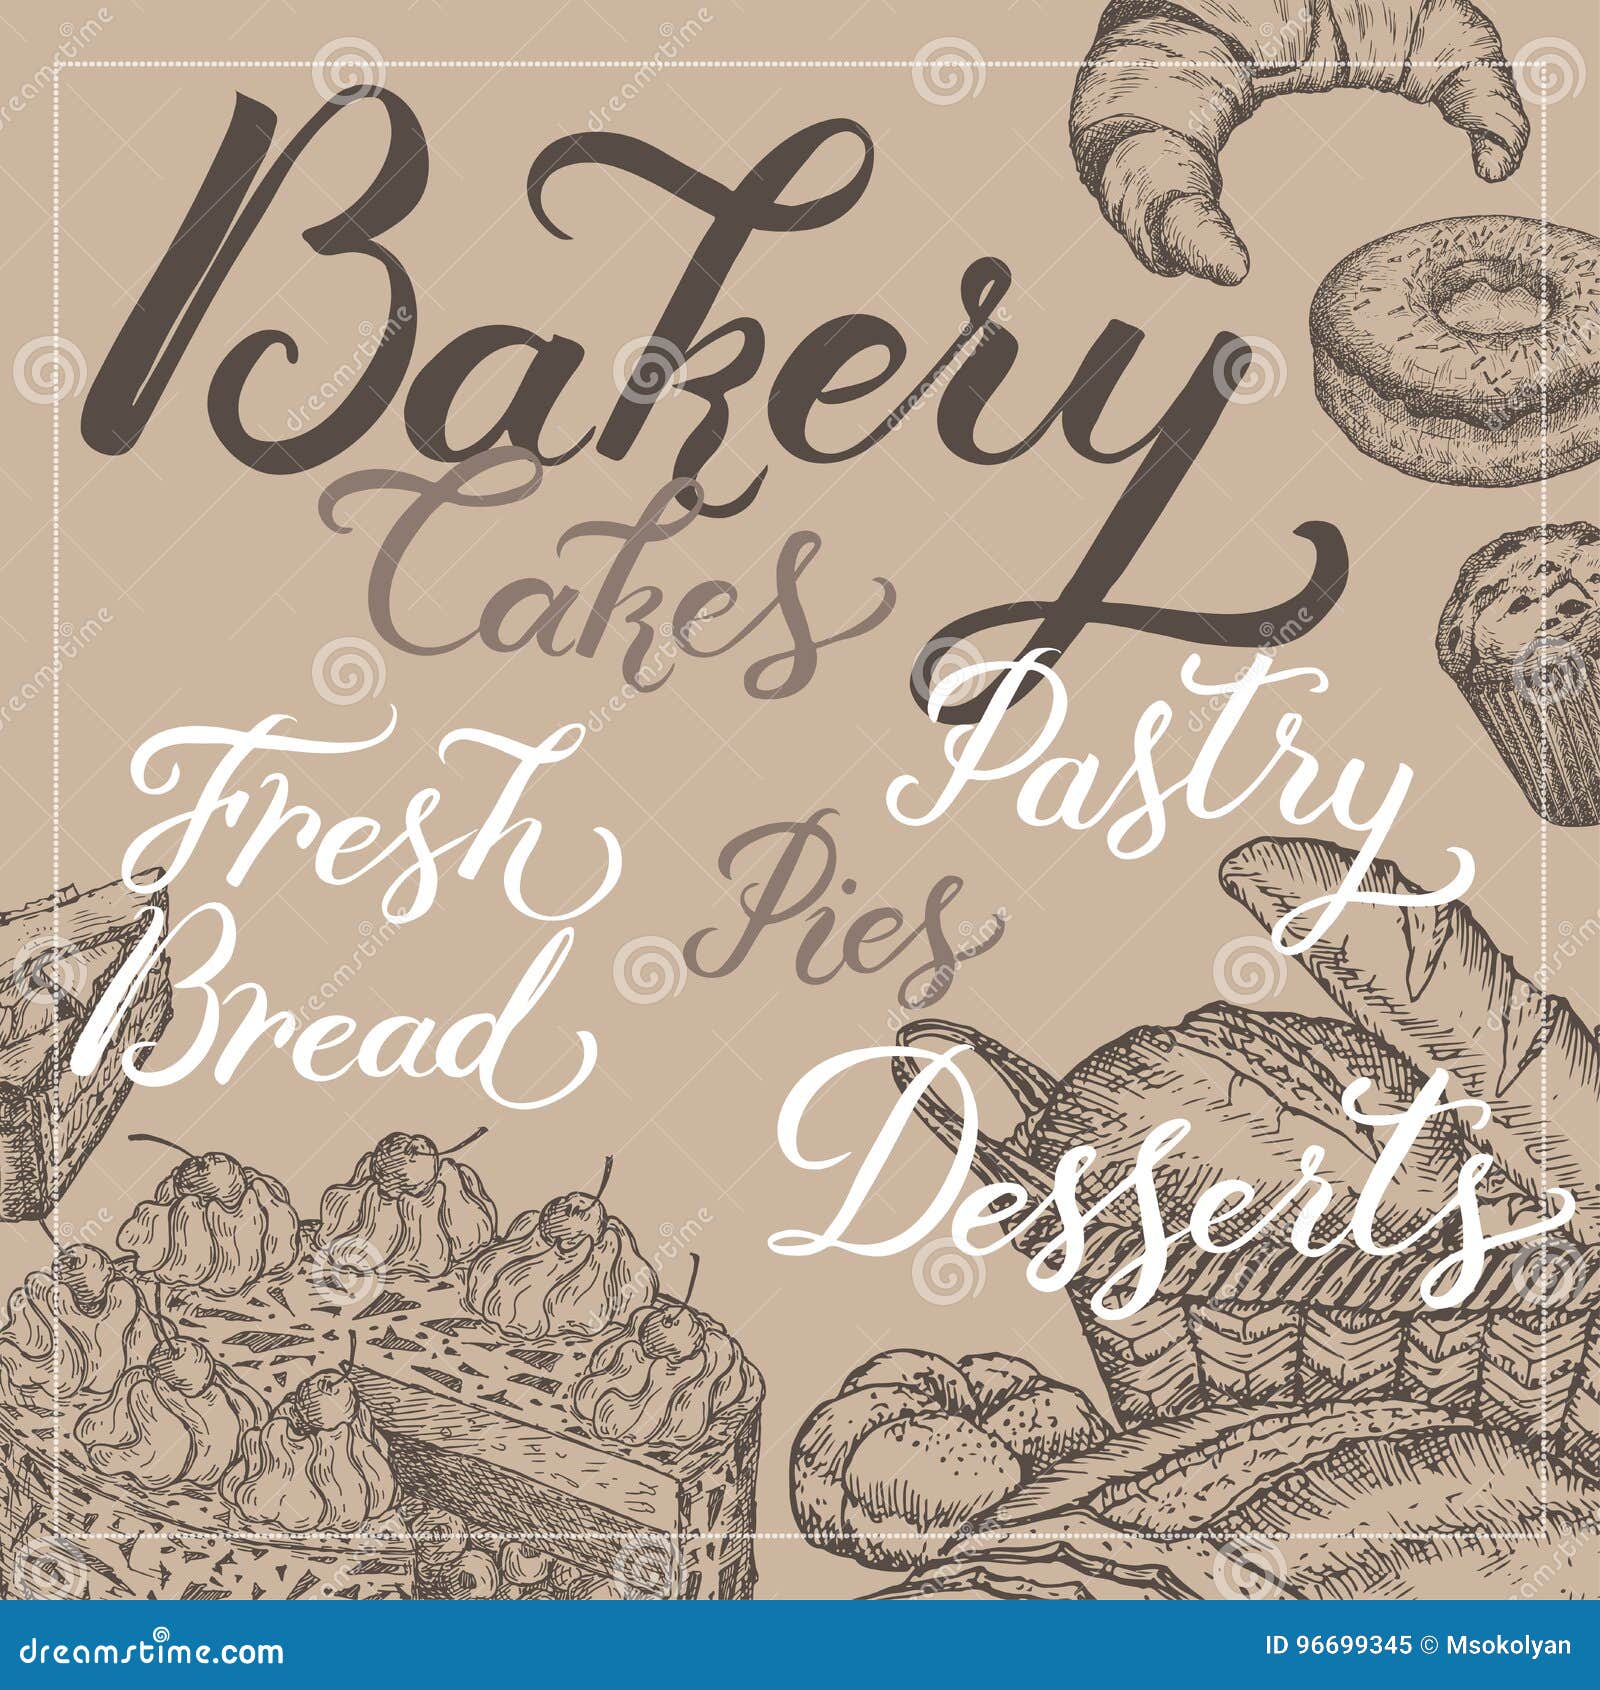 Bakery Template With Bread Pastry Cake Pie Sketch And Related